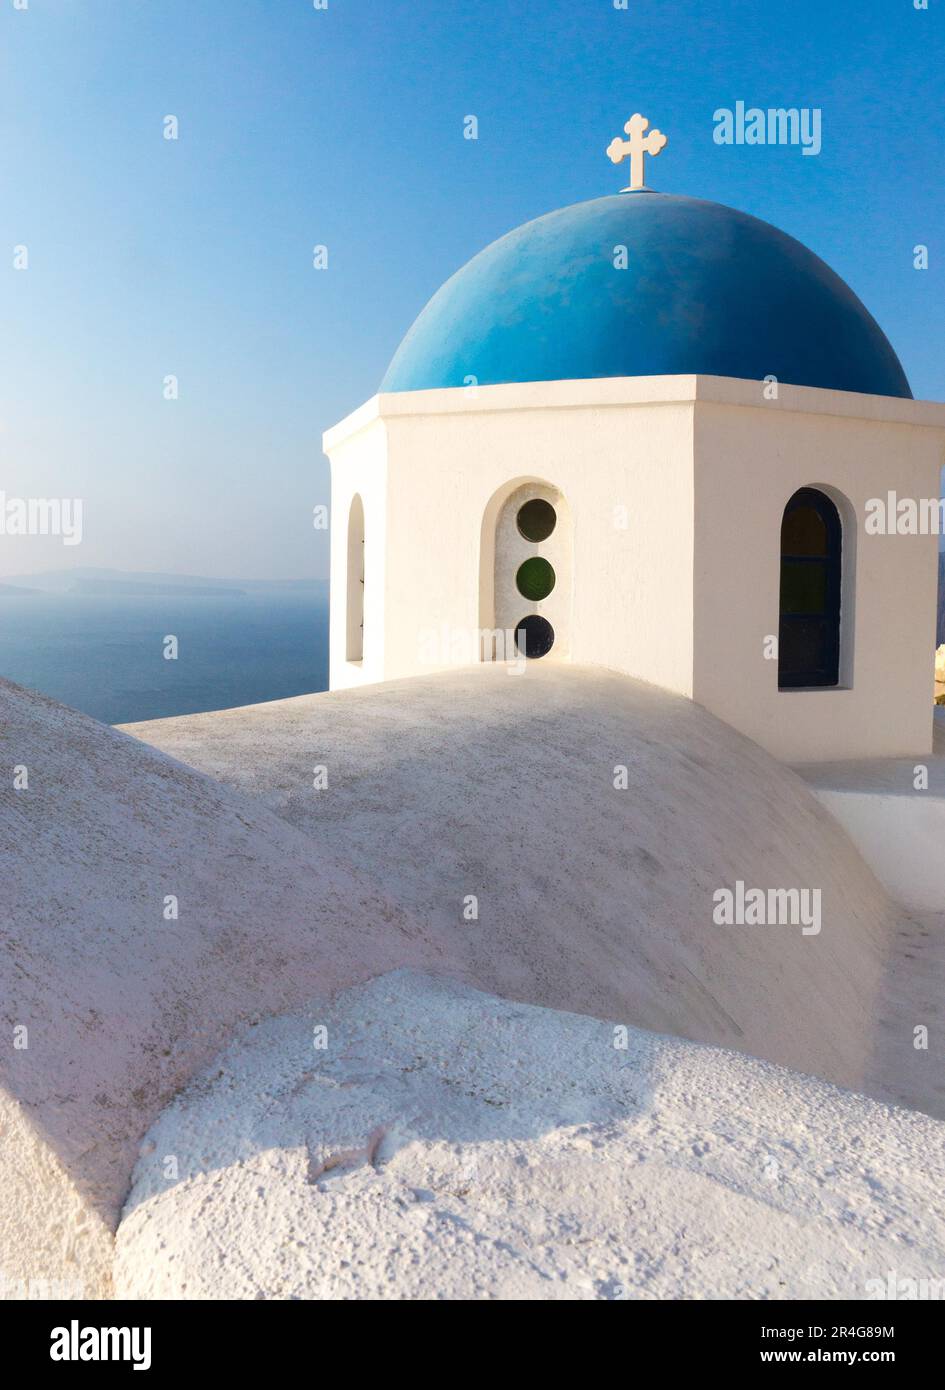 Roof and dome of a church on Santorini, Greece Stock Photo